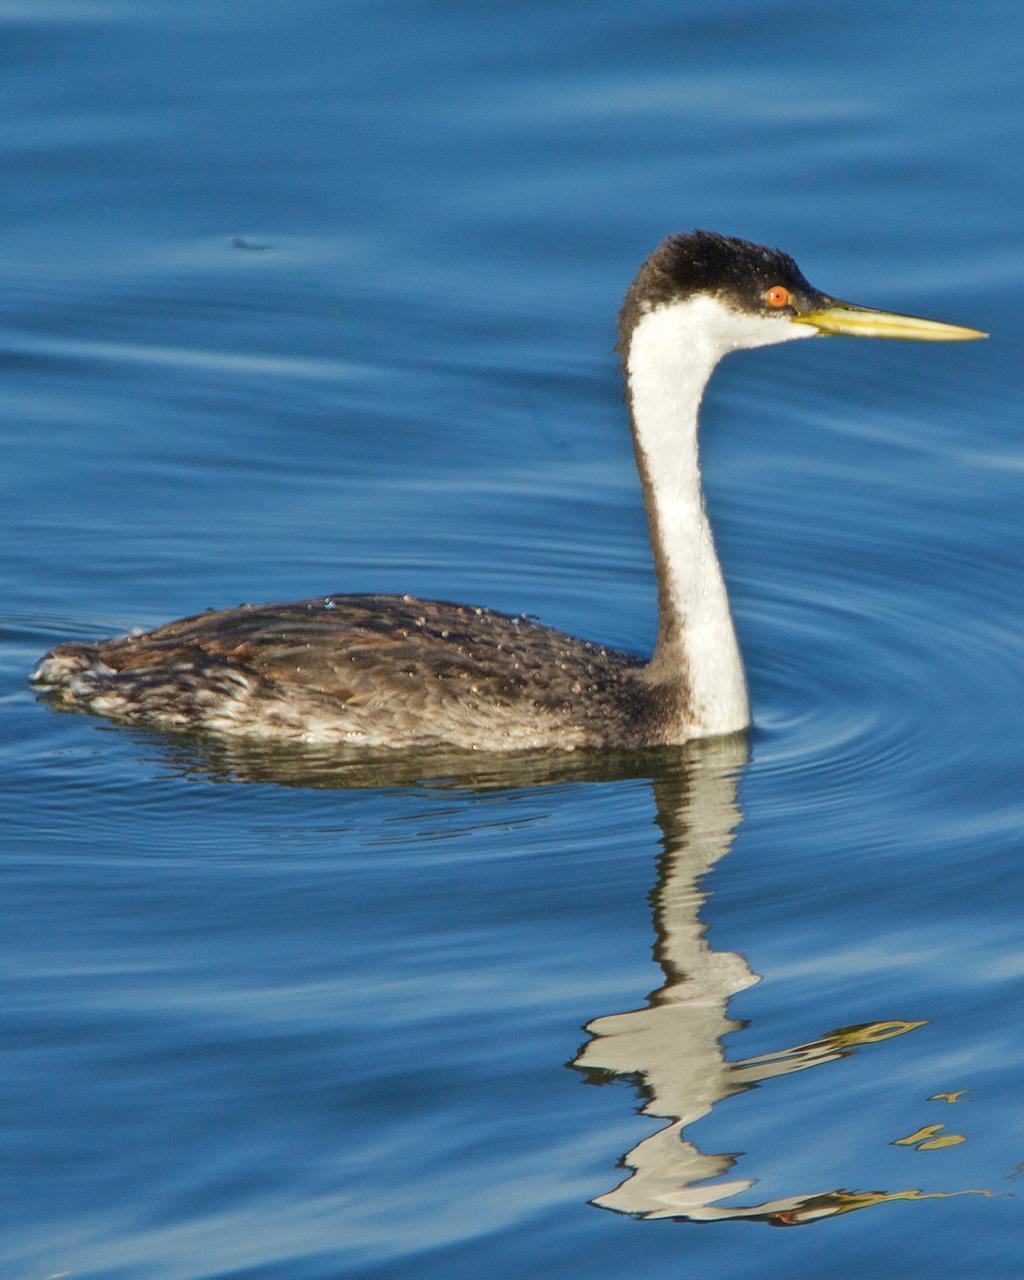 Western Grebe Photo by Brian Avent